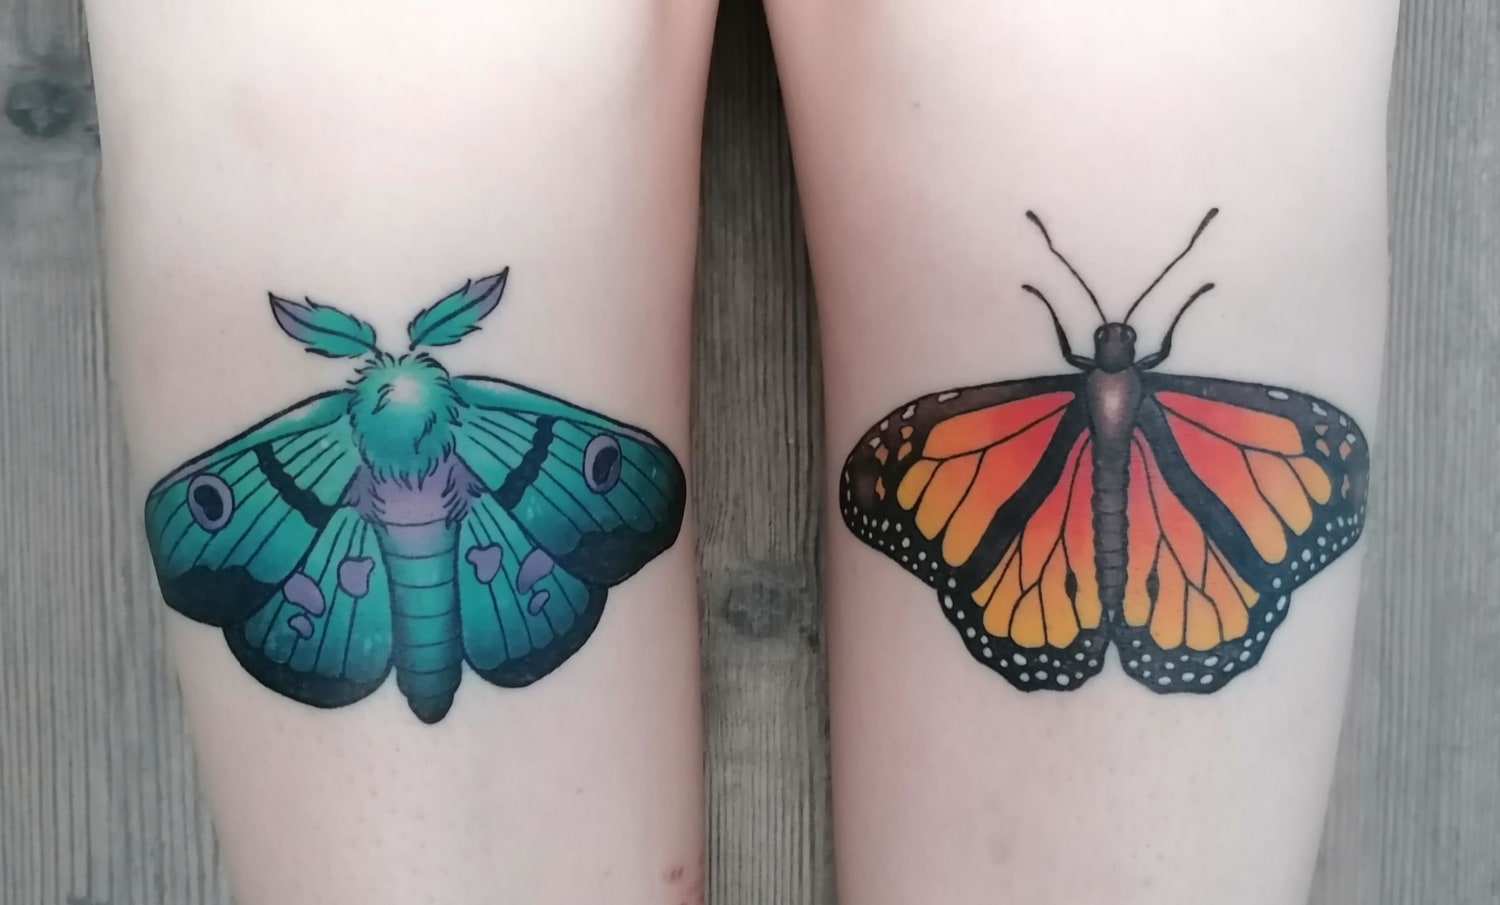 Moth and Butterfly (healed) done by Naja at Elektrotinte in Cologne, Germany